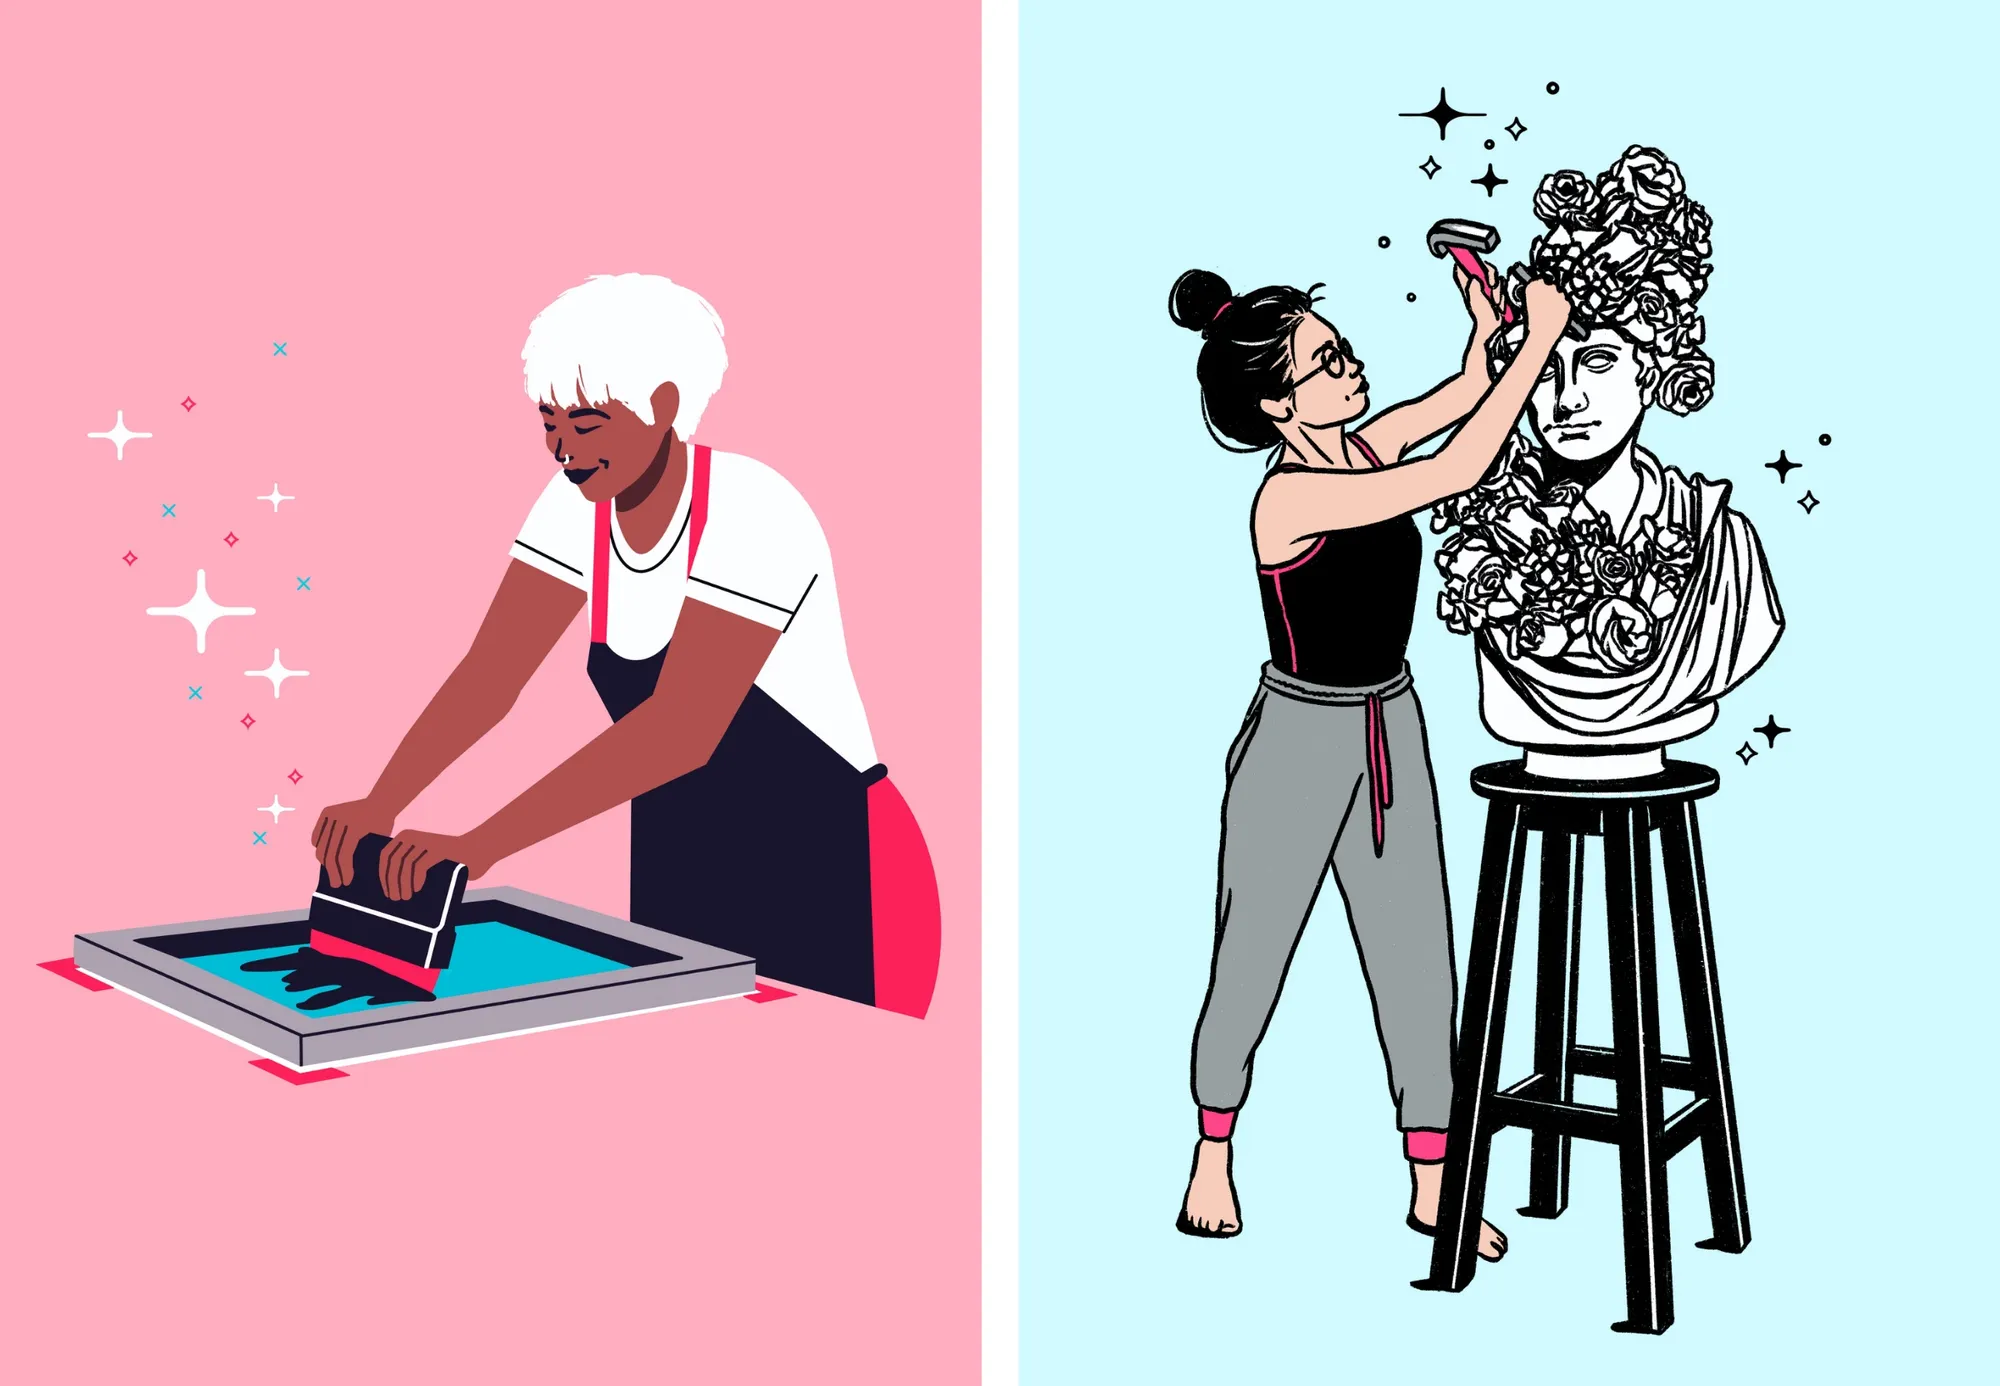 Illustration by Sophie Alp of two women artists. 